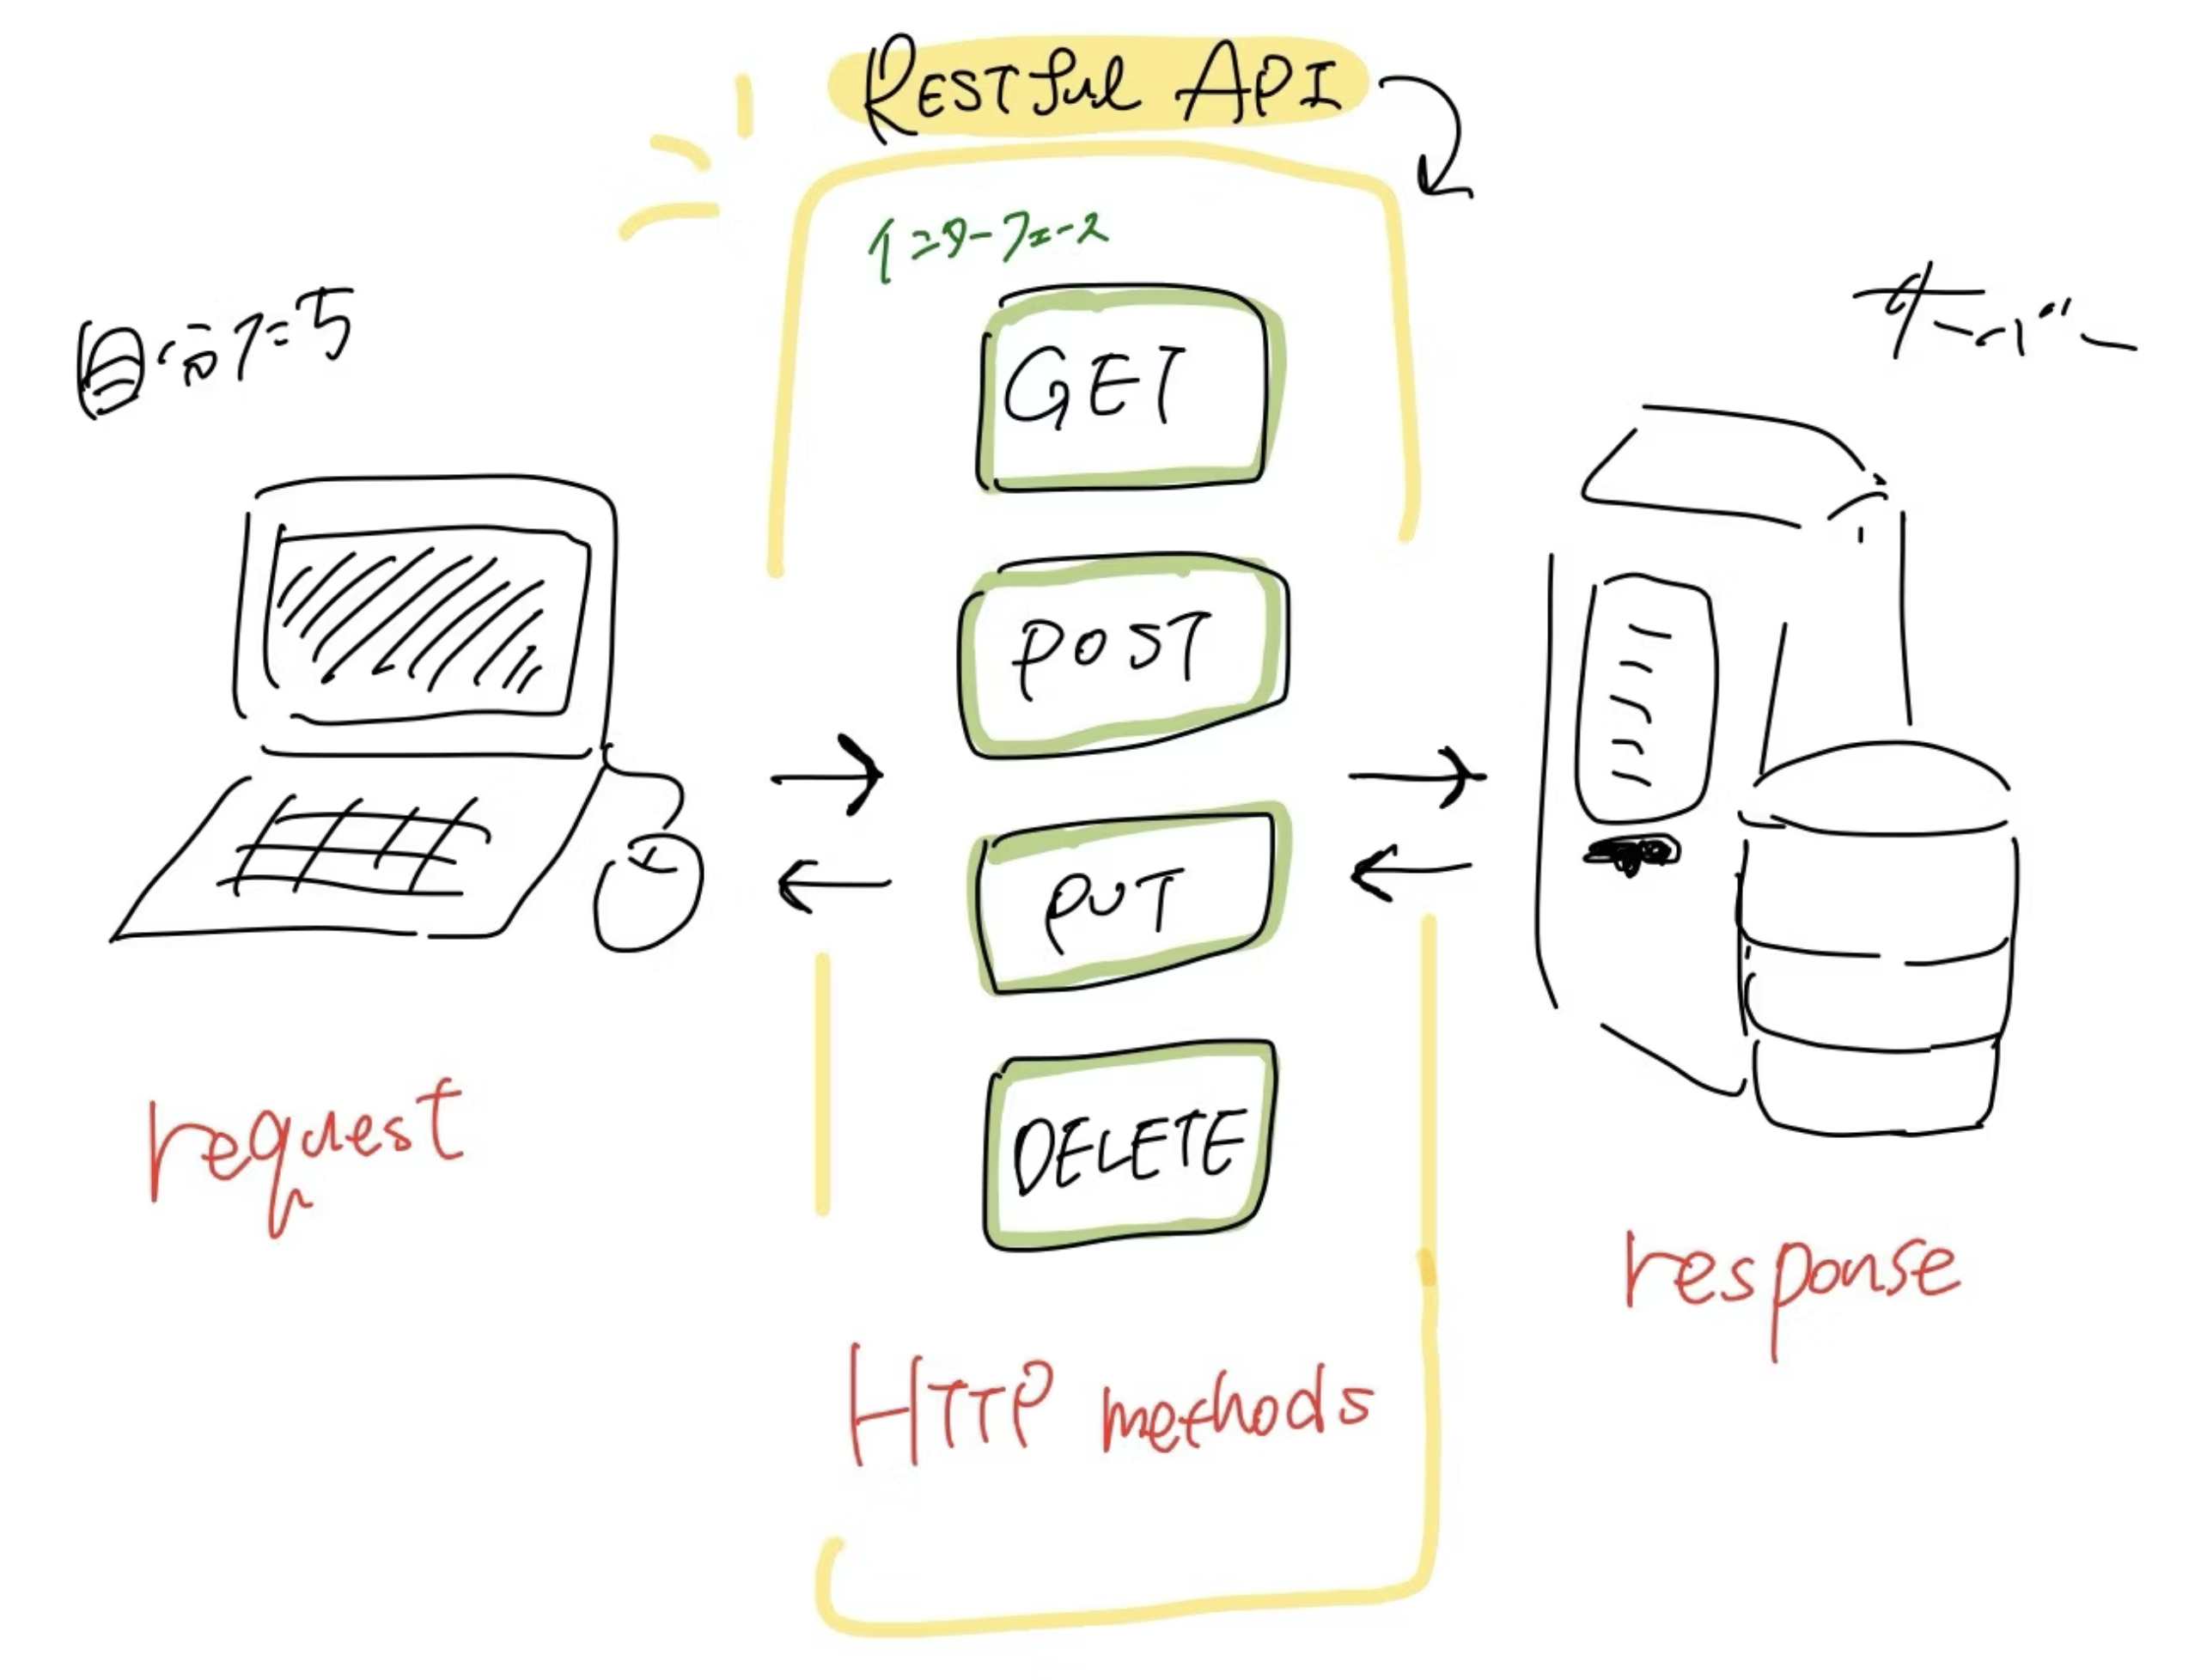 What are REST APIs